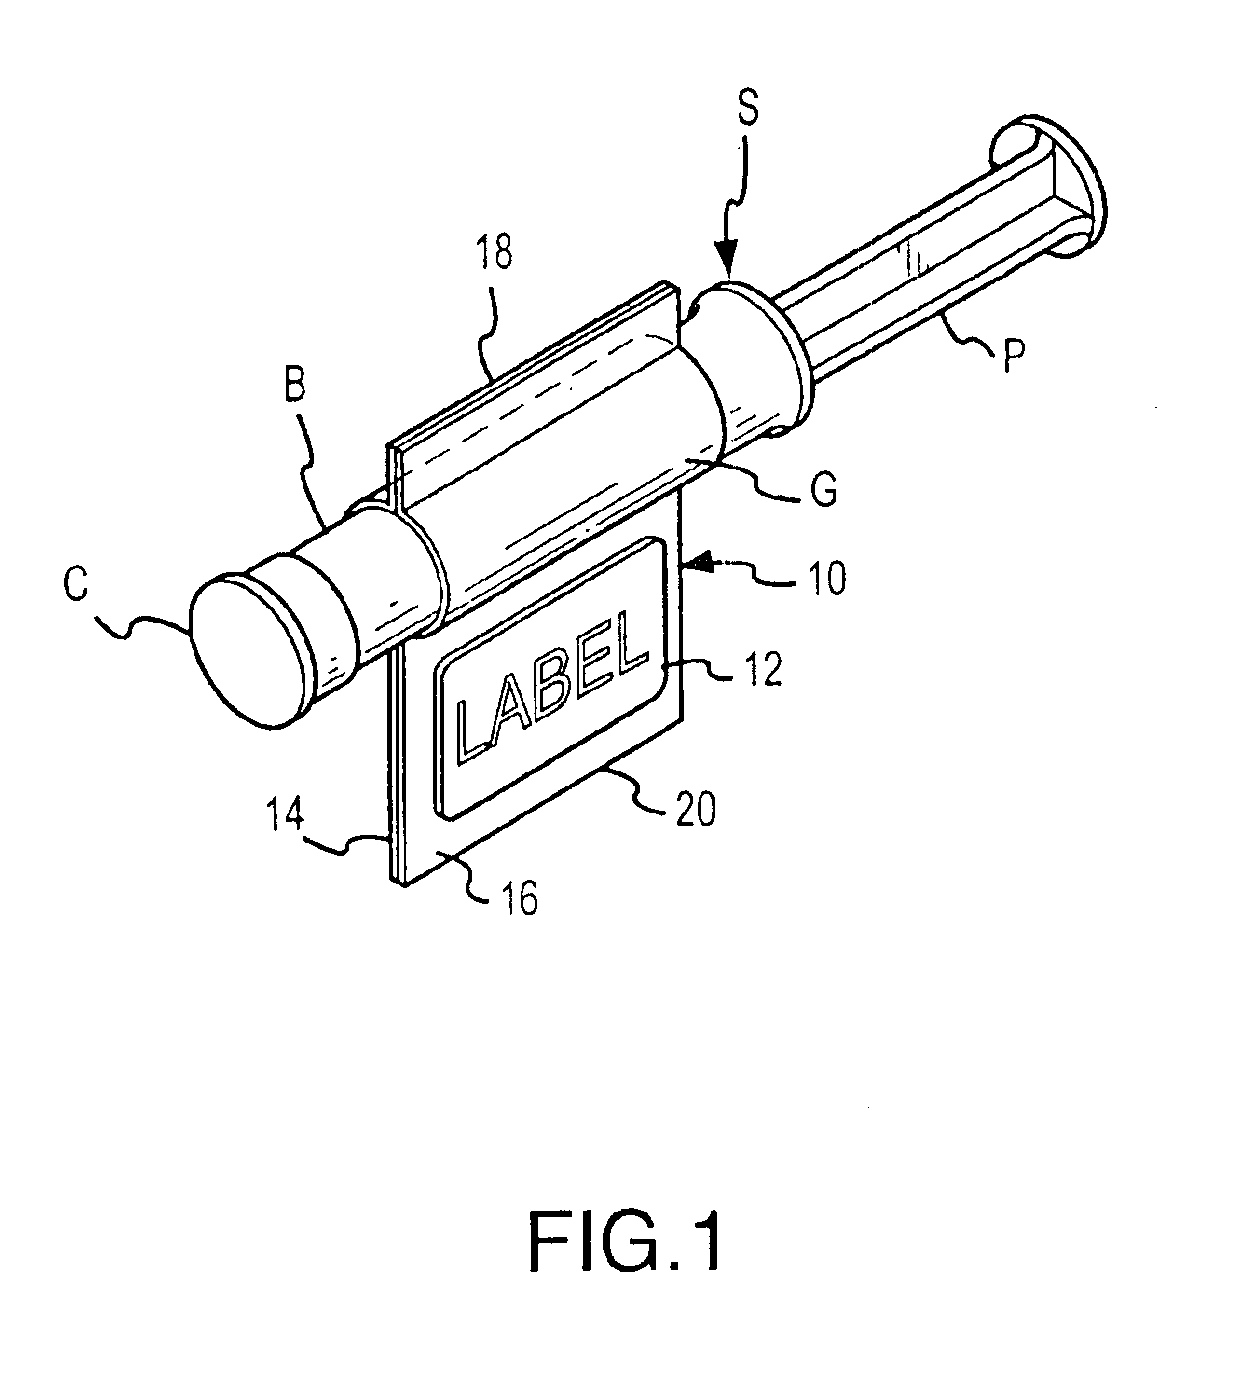 Method and system for labeling syringe bodies